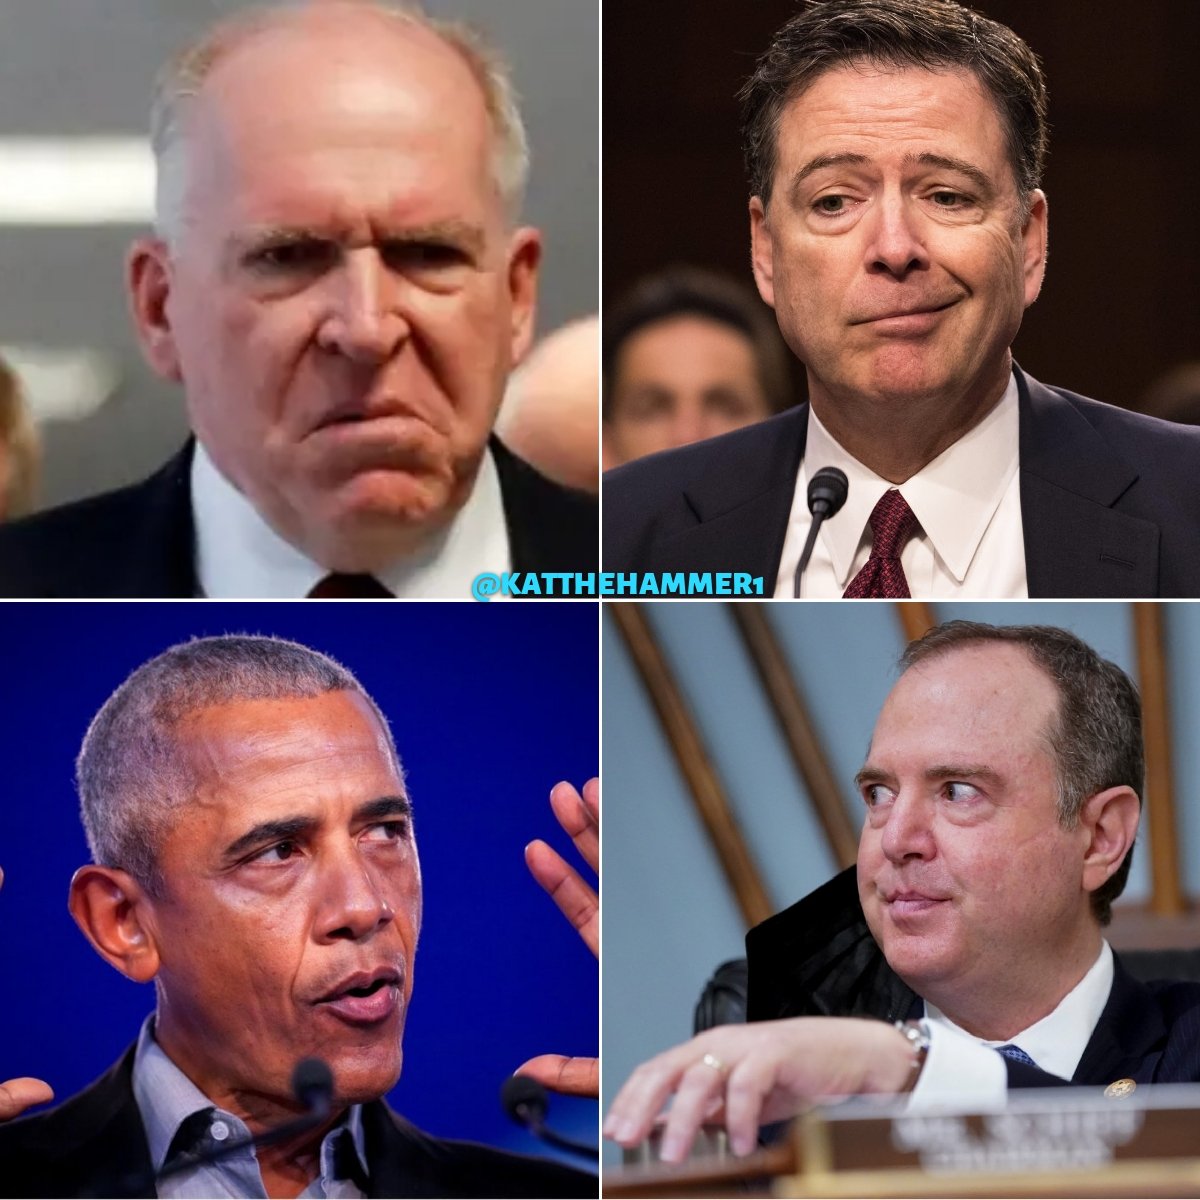 Here's the Russian collusion: ✔️Brennan made the call to Comey ✔️ Comey leaked work docs to provoke a special counsel. ✔️ Schiff pushed the lie everyday claiming he had irrefutable proof. ✔️ Obama approved the entire operation. All 4 should be in Prison! @GenFlynn